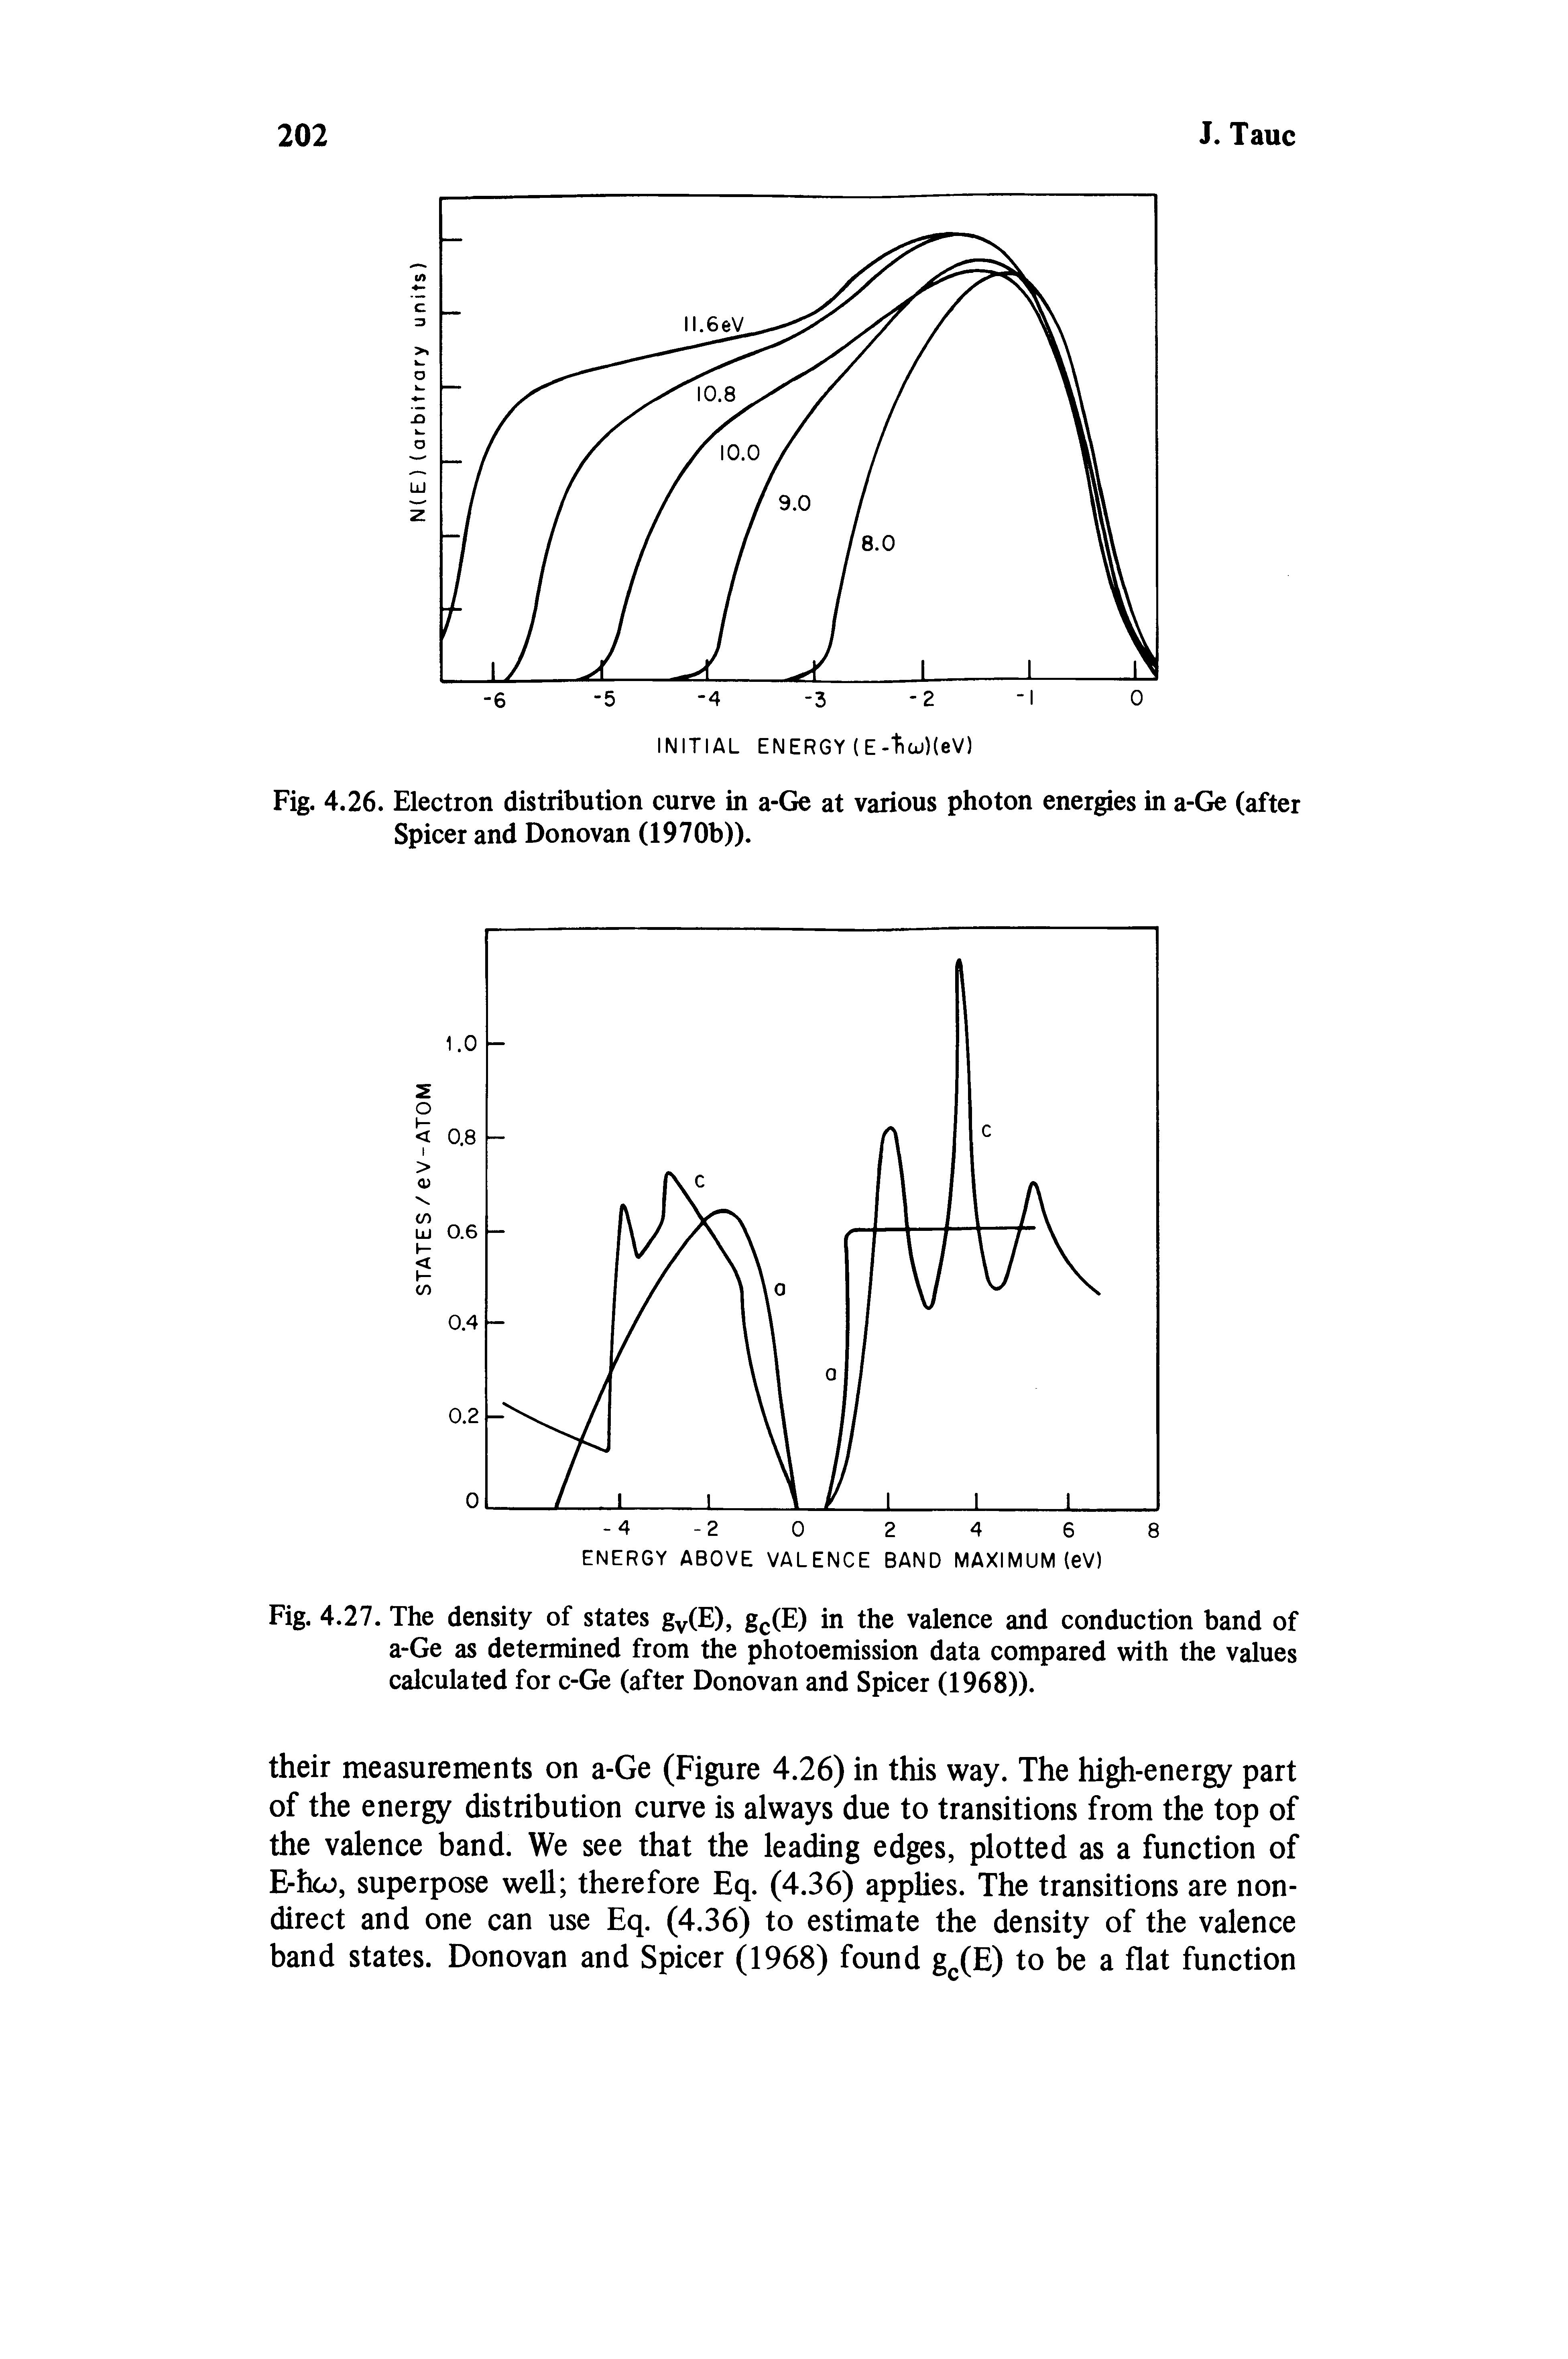 Fig. 4.26. Electron distribution curve in a-Ge at various photon energies in a-Ge (after Spicer and Donovan (1970b)).